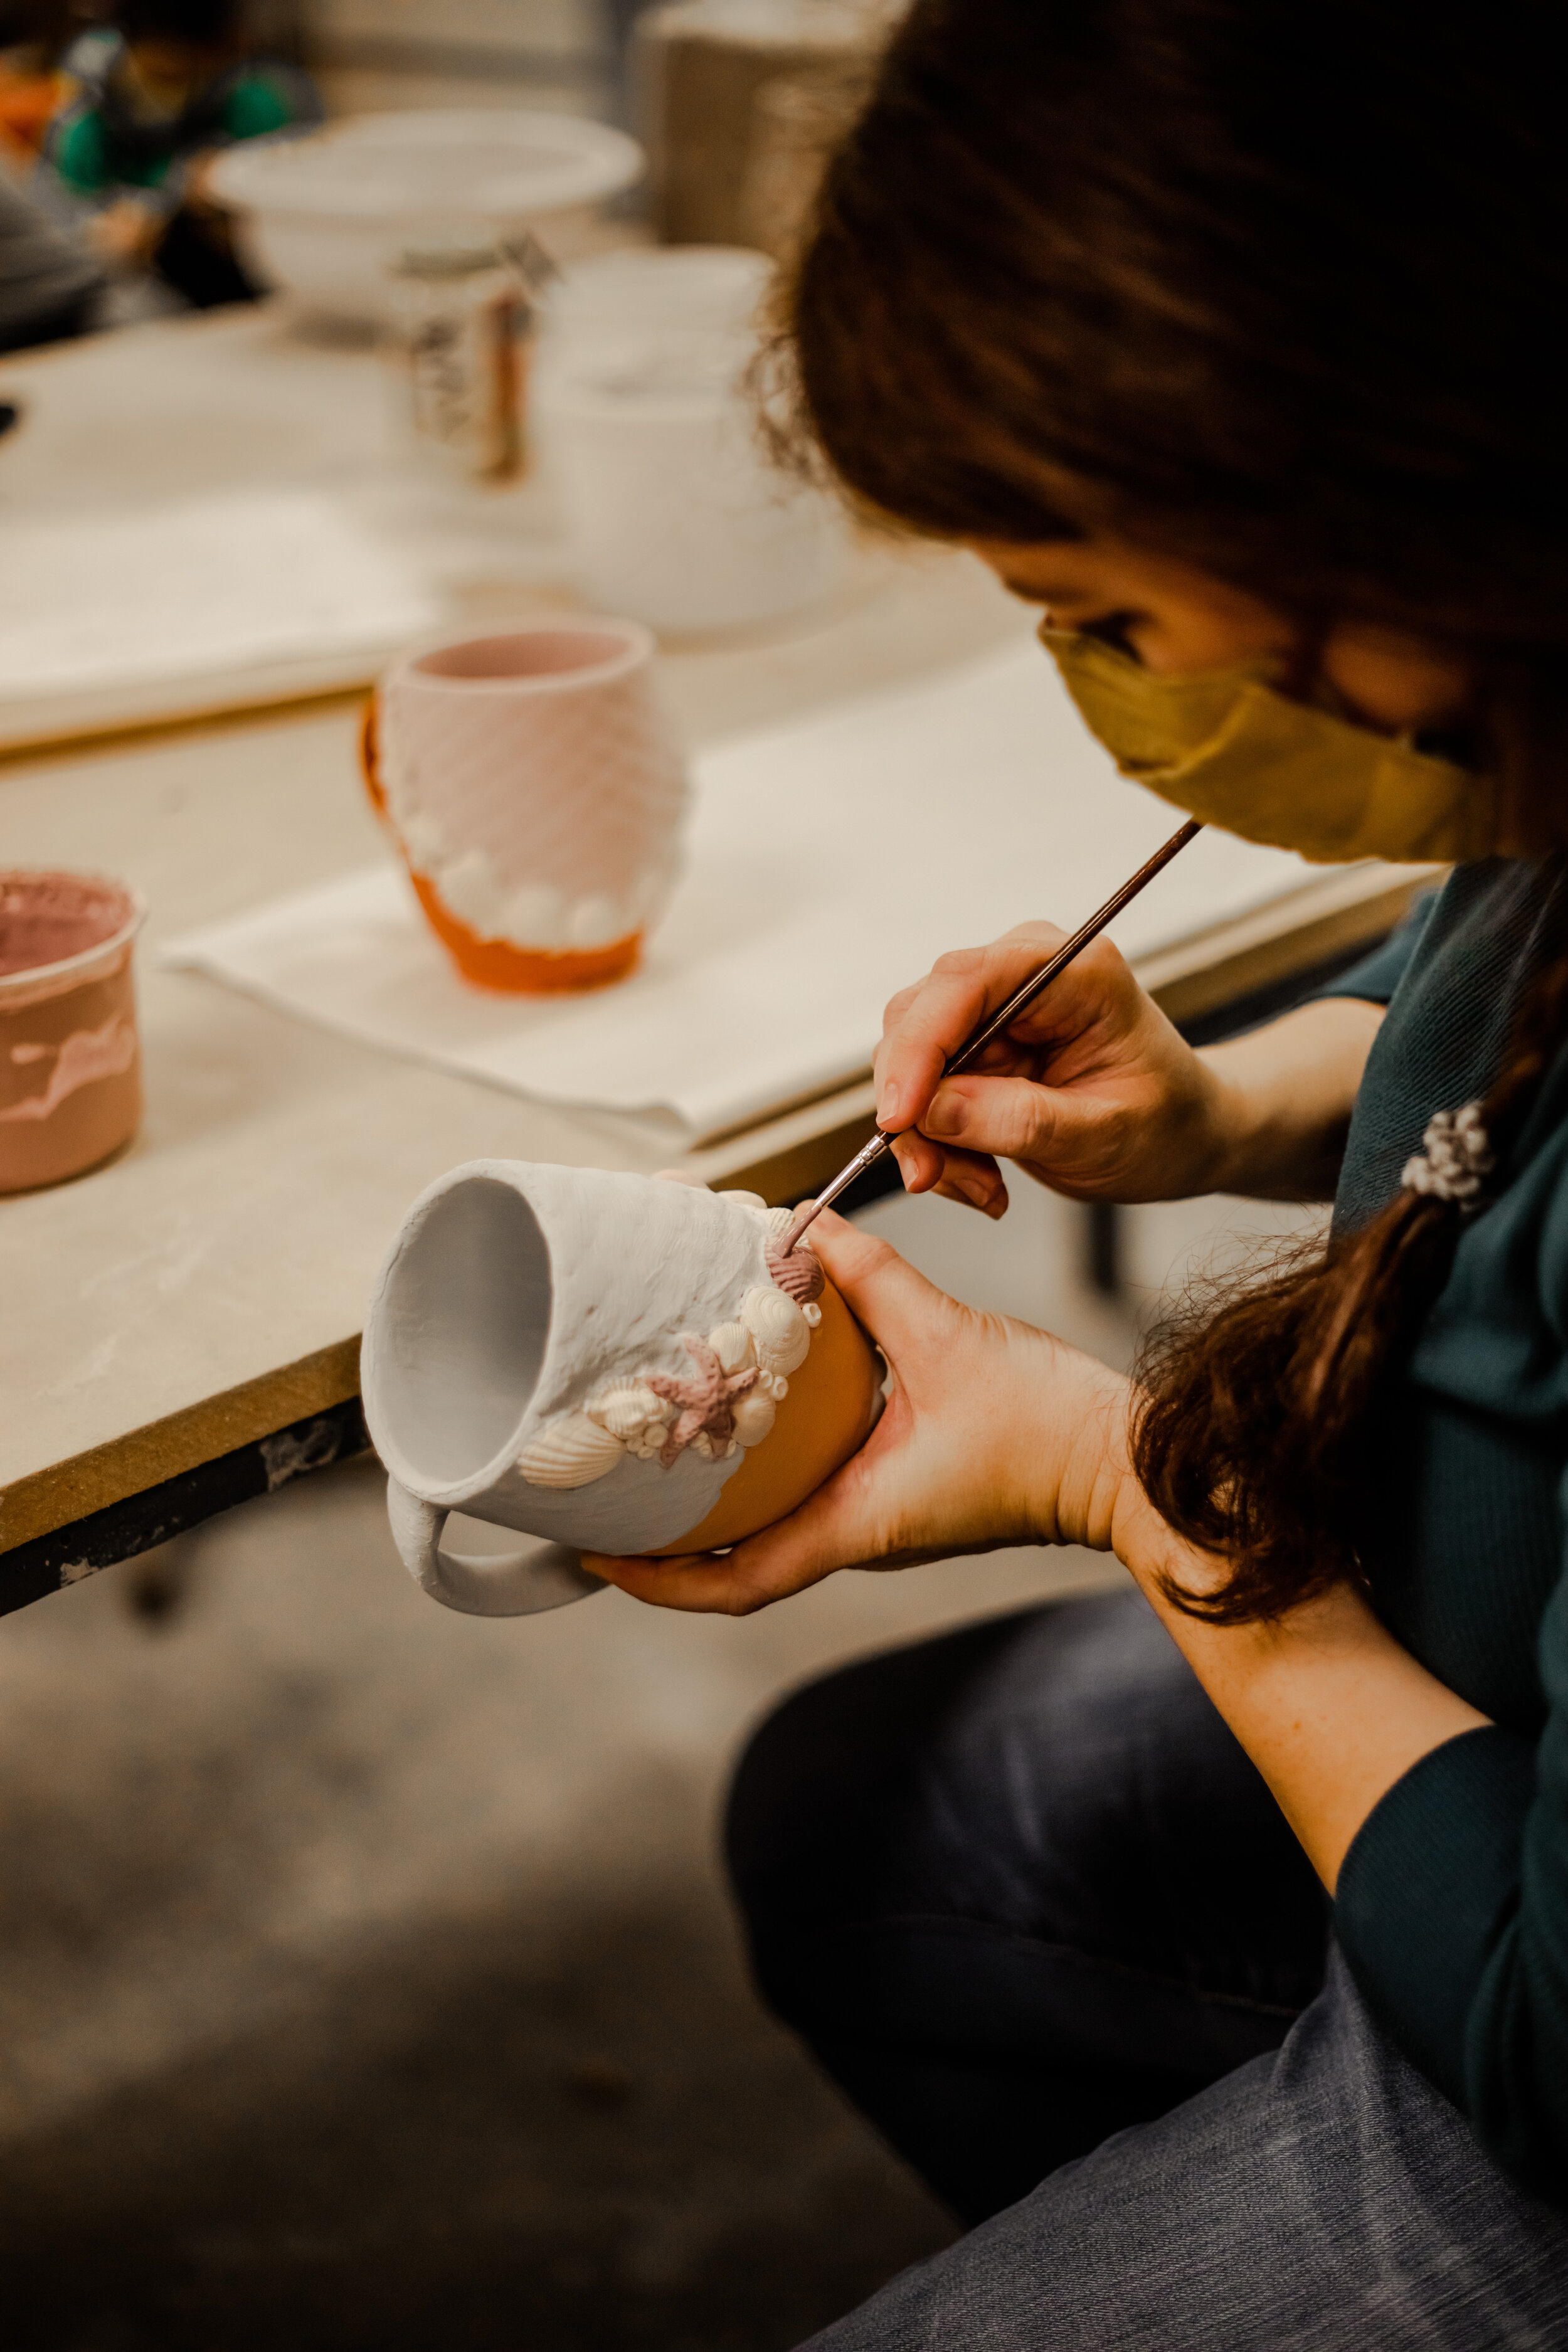 She specializes in creating ocean-themed coffee mugs.